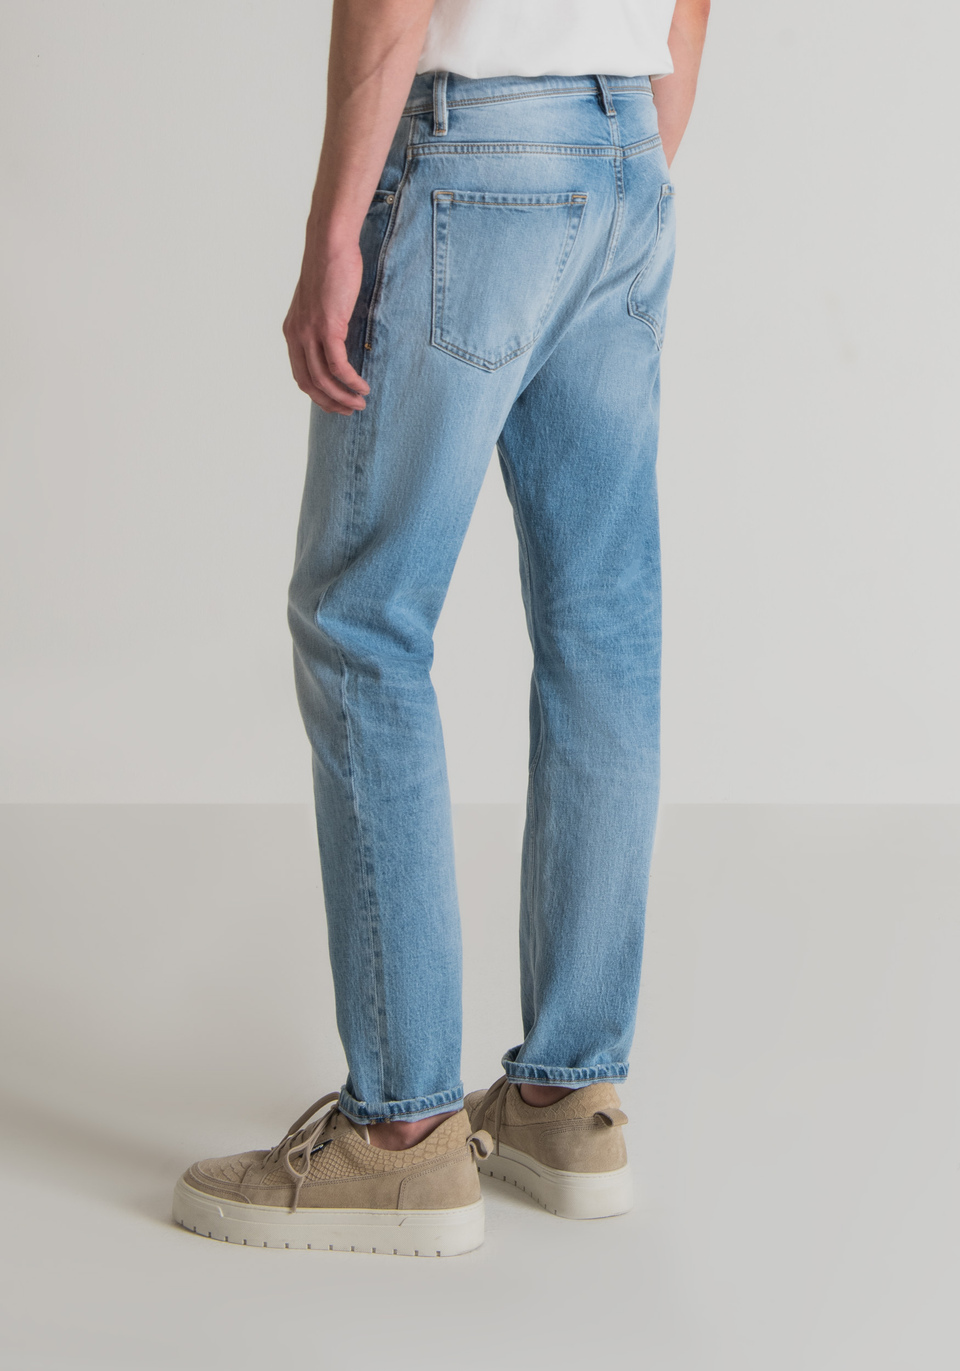 "CLEVE" STRAIGHT LEG SLIM FIT JEANS IN COMFORT DENIM WITH LIGHT WASH - Antony Morato Online Shop